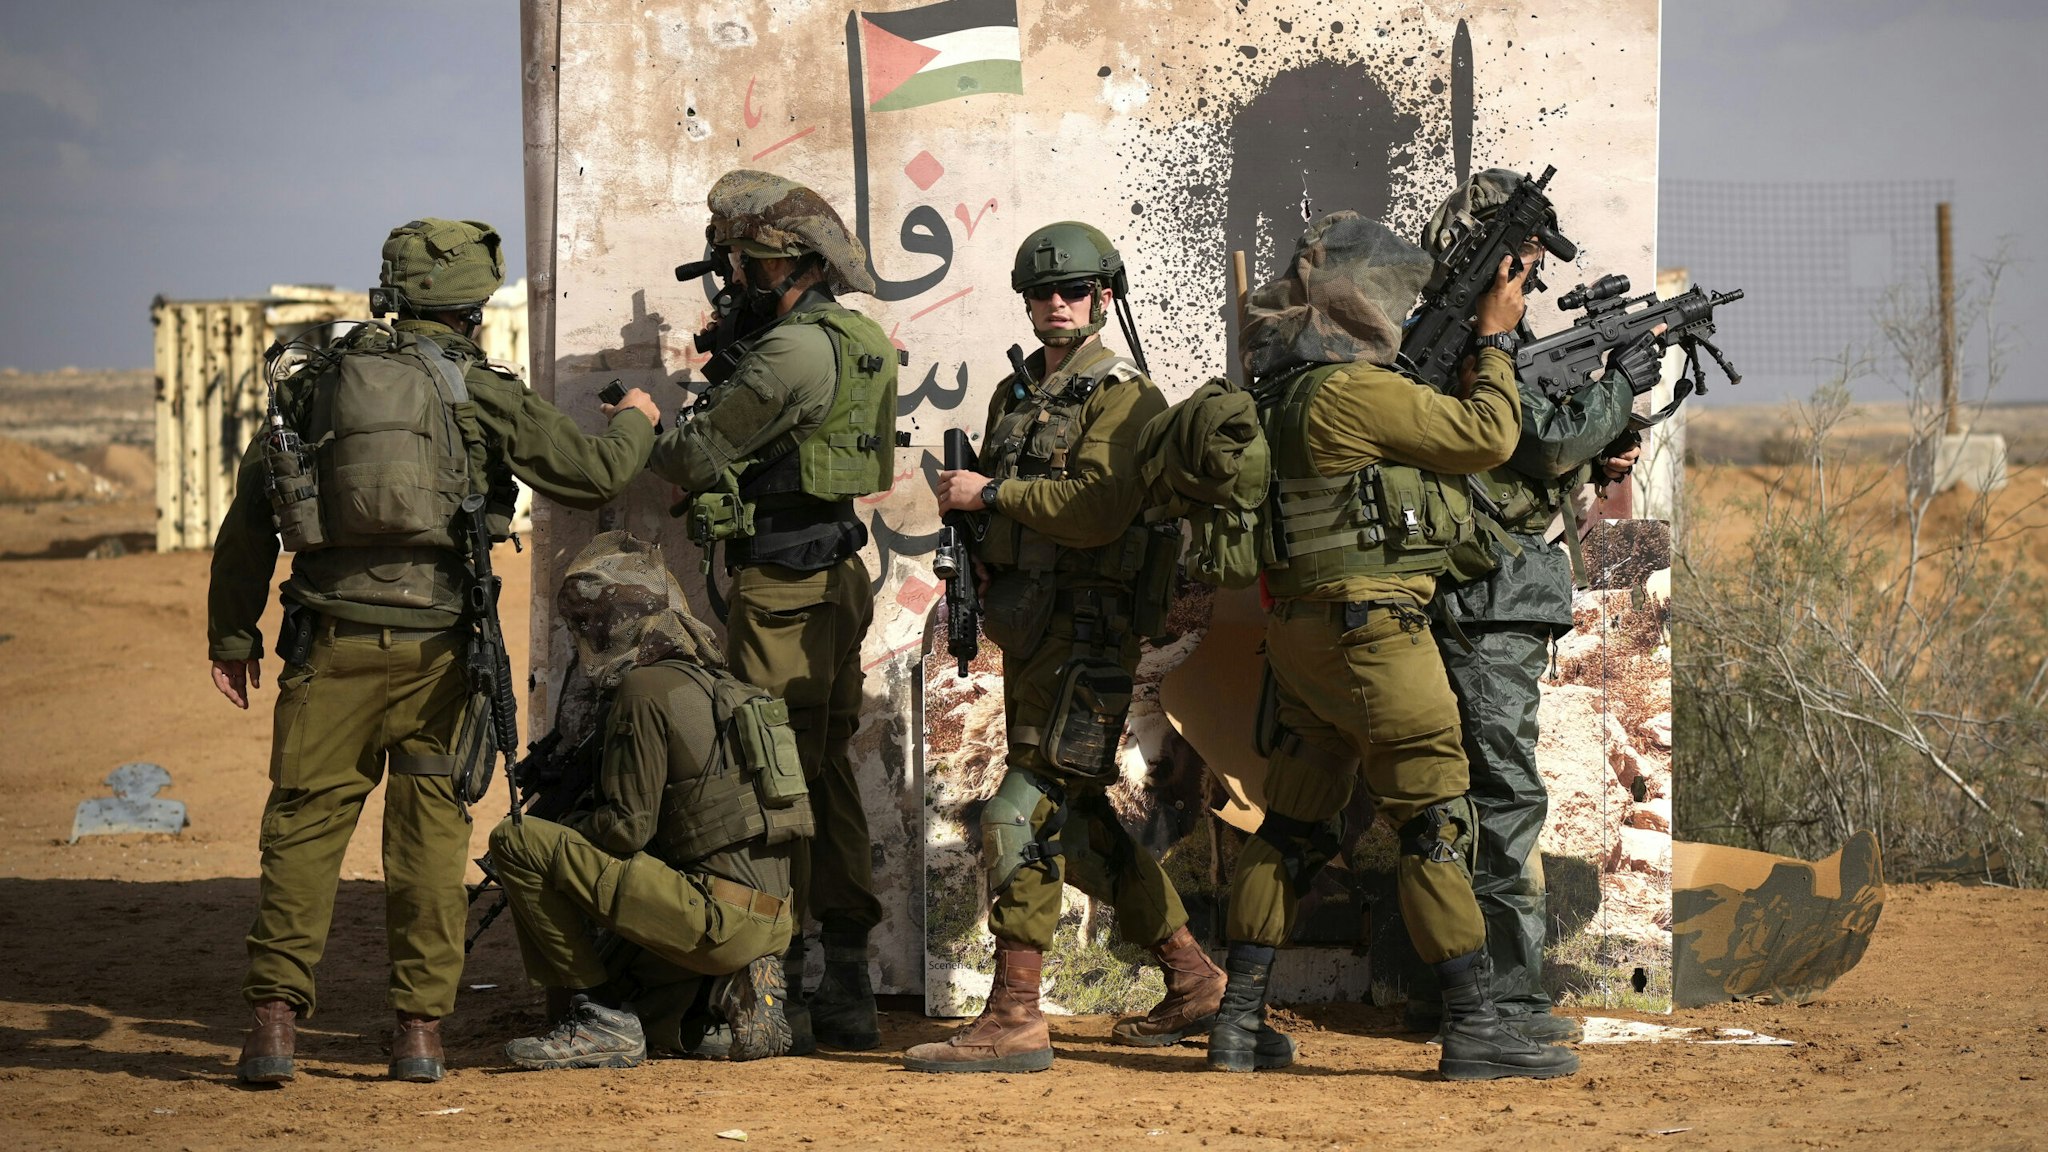 SOUTHERN ISRAEL - NOVEMBER 20: Israeli infantry soldiers take part in a live firing tactical advance exercise near the border in readiness for possible deployment across the border into Gaza on November 20, 2023 in Southern Israel. More than a month after Hamas's Oct. 7 attacks, the country's military has continued its sustained bombardment of the Gaza Strip and launched a ground invasion to vanquish the militant group that governs the Palestinian territory.